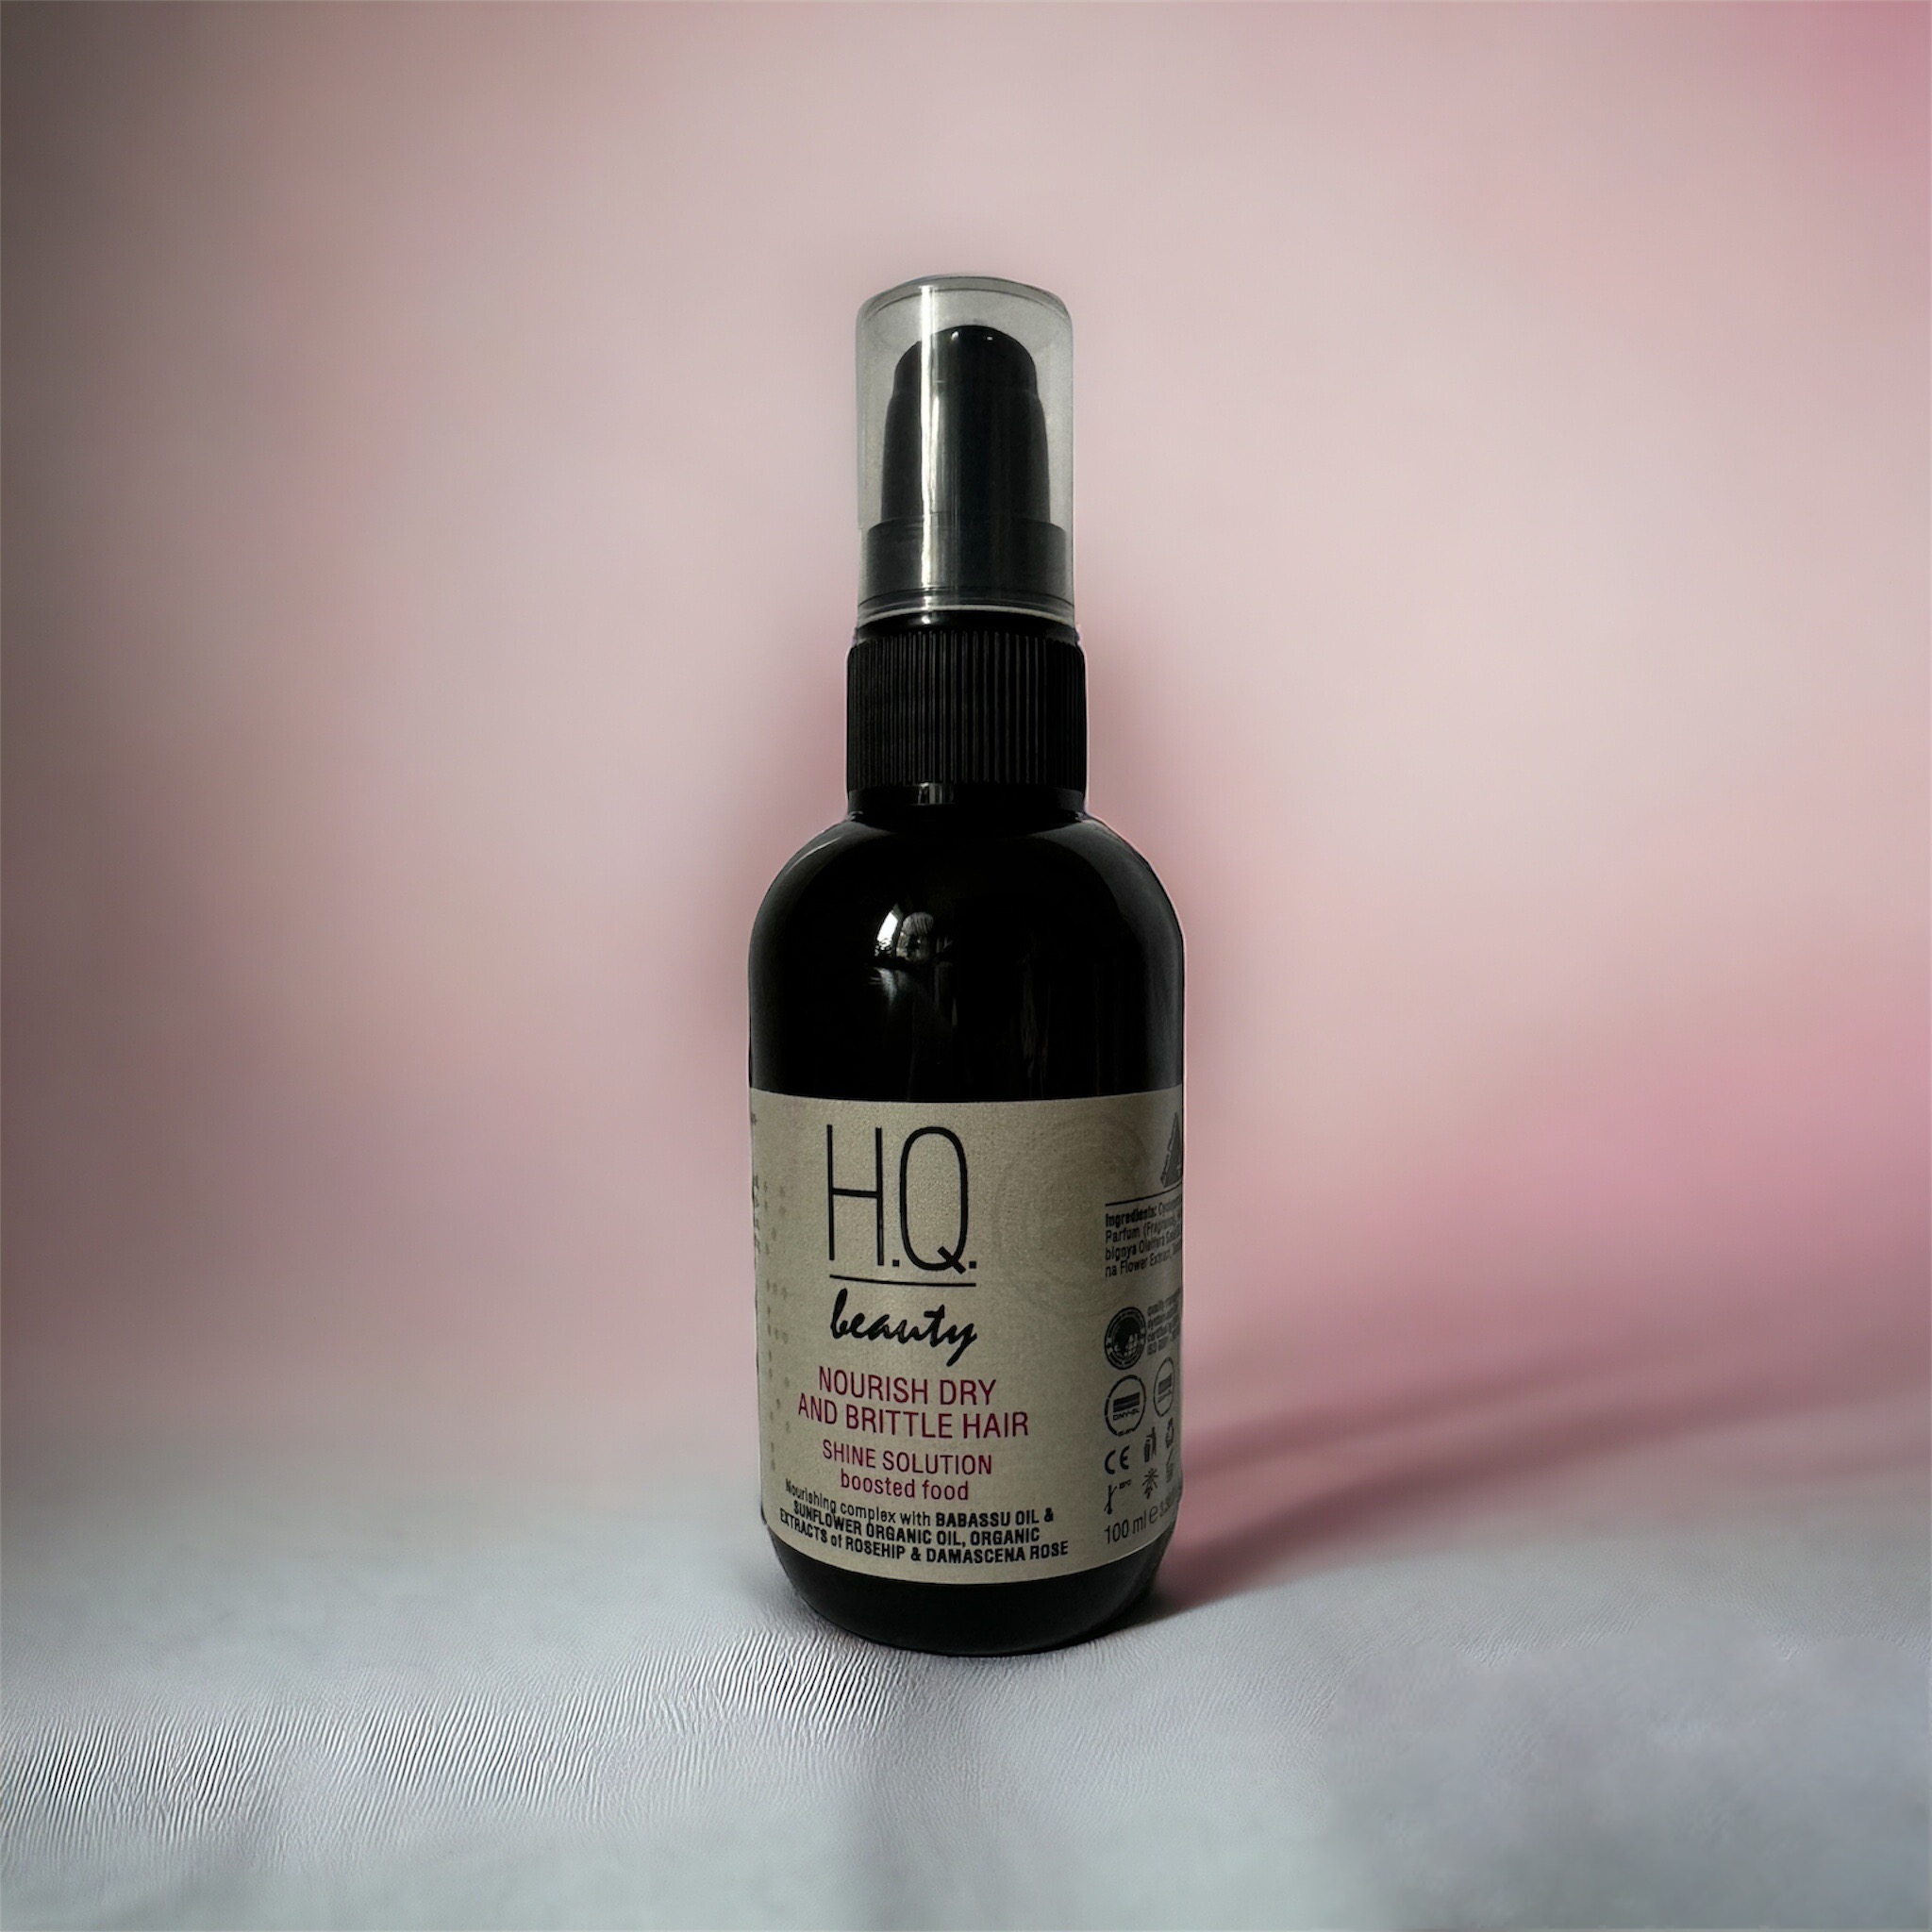 H.Q.Beauty Nourish Dry And Brittle Hair Shine Solution